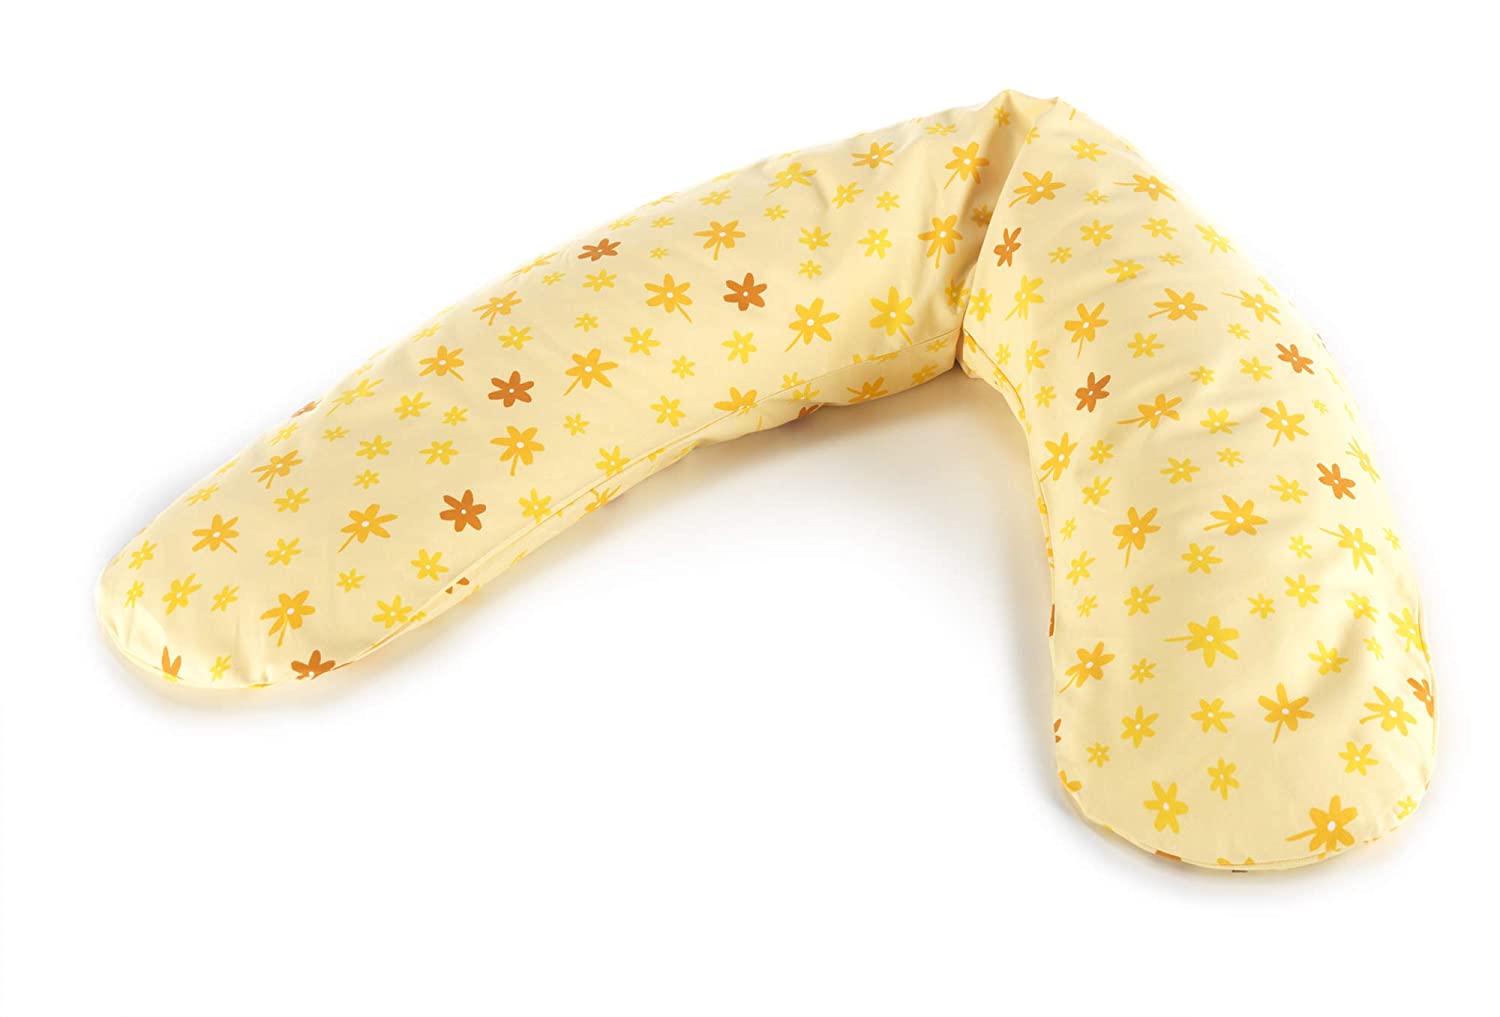 The Theraline Comfort Nursing Pillow Filled with Fine Sandy Micro Beads Including Outer Cover 180 cm